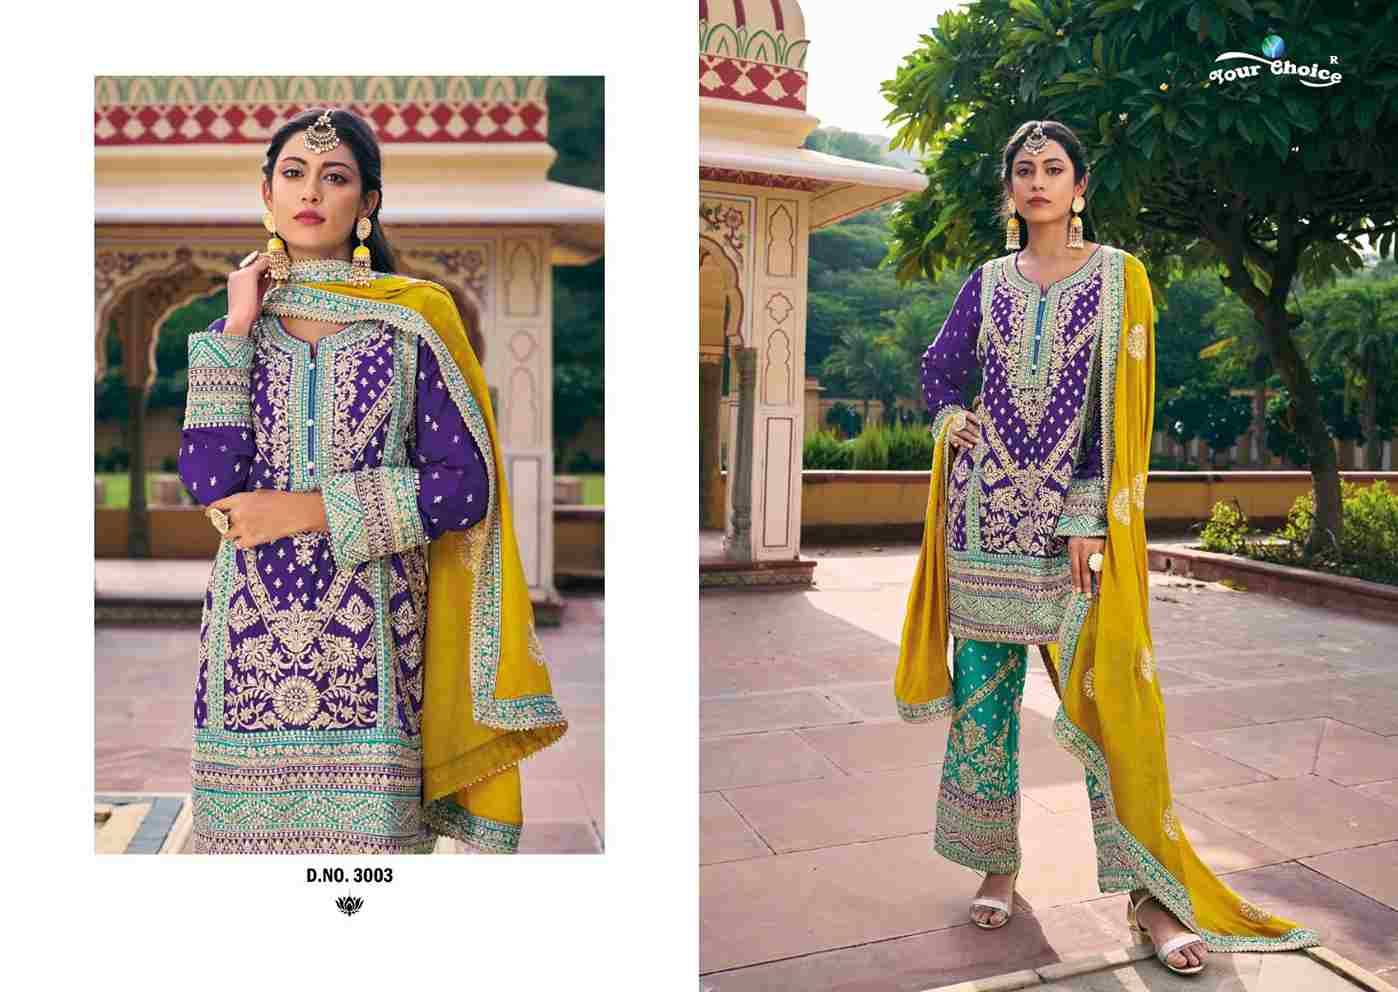 Avani By Your Choice 3001 To 3003 Series Beautiful Festive Suits Colorful Stylish Fancy Casual Wear & Ethnic Wear Premium Chinnon Embroidered Dresses At Wholesale Price